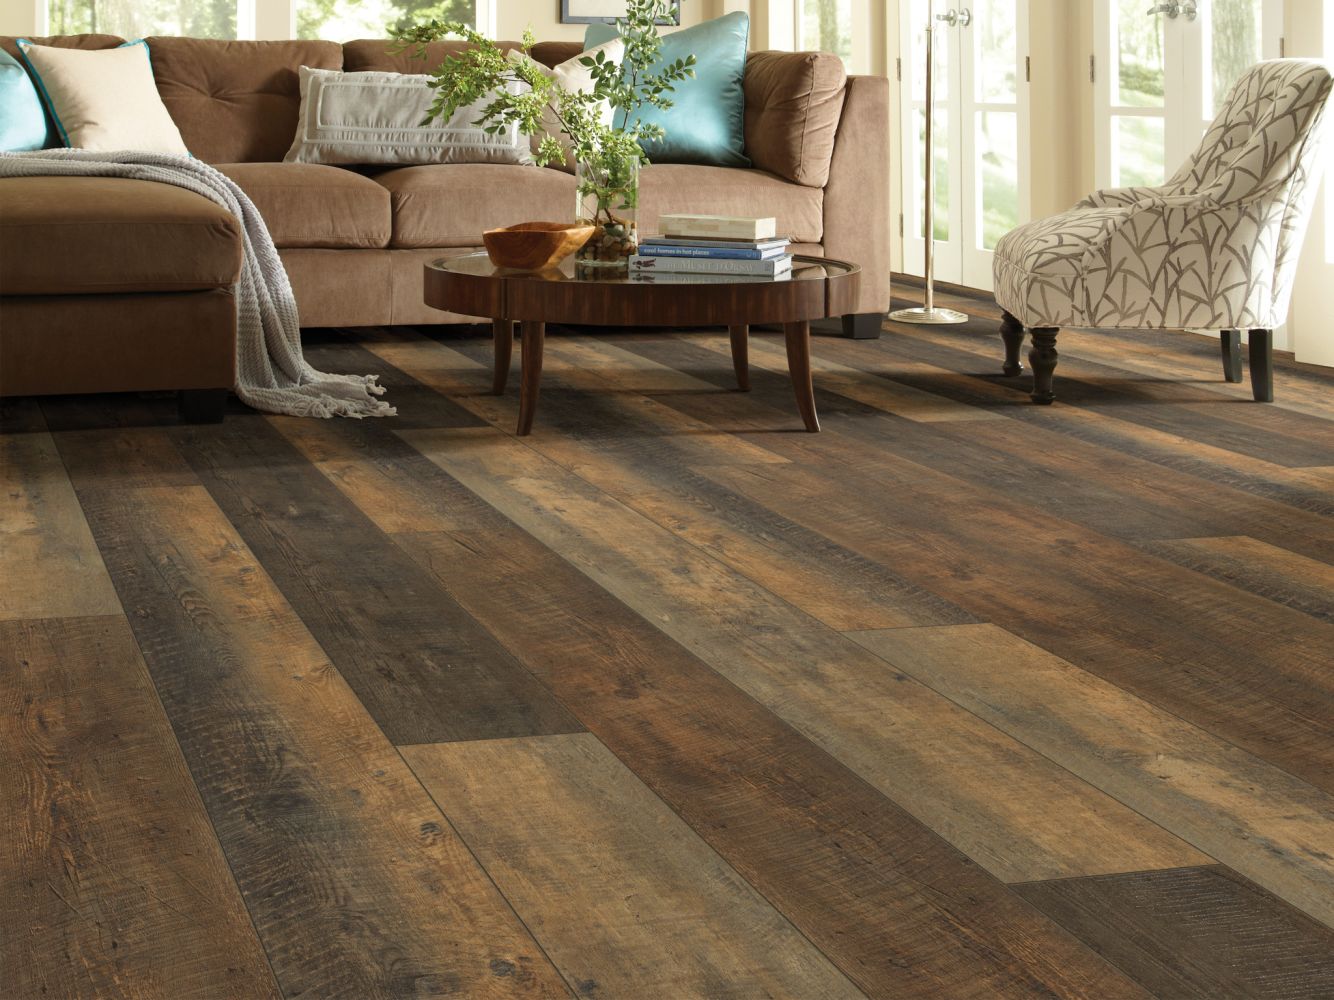 Shaw Floors Resilient Property Solutions Colossus HD + Autumn Barnboard 00689_VE243